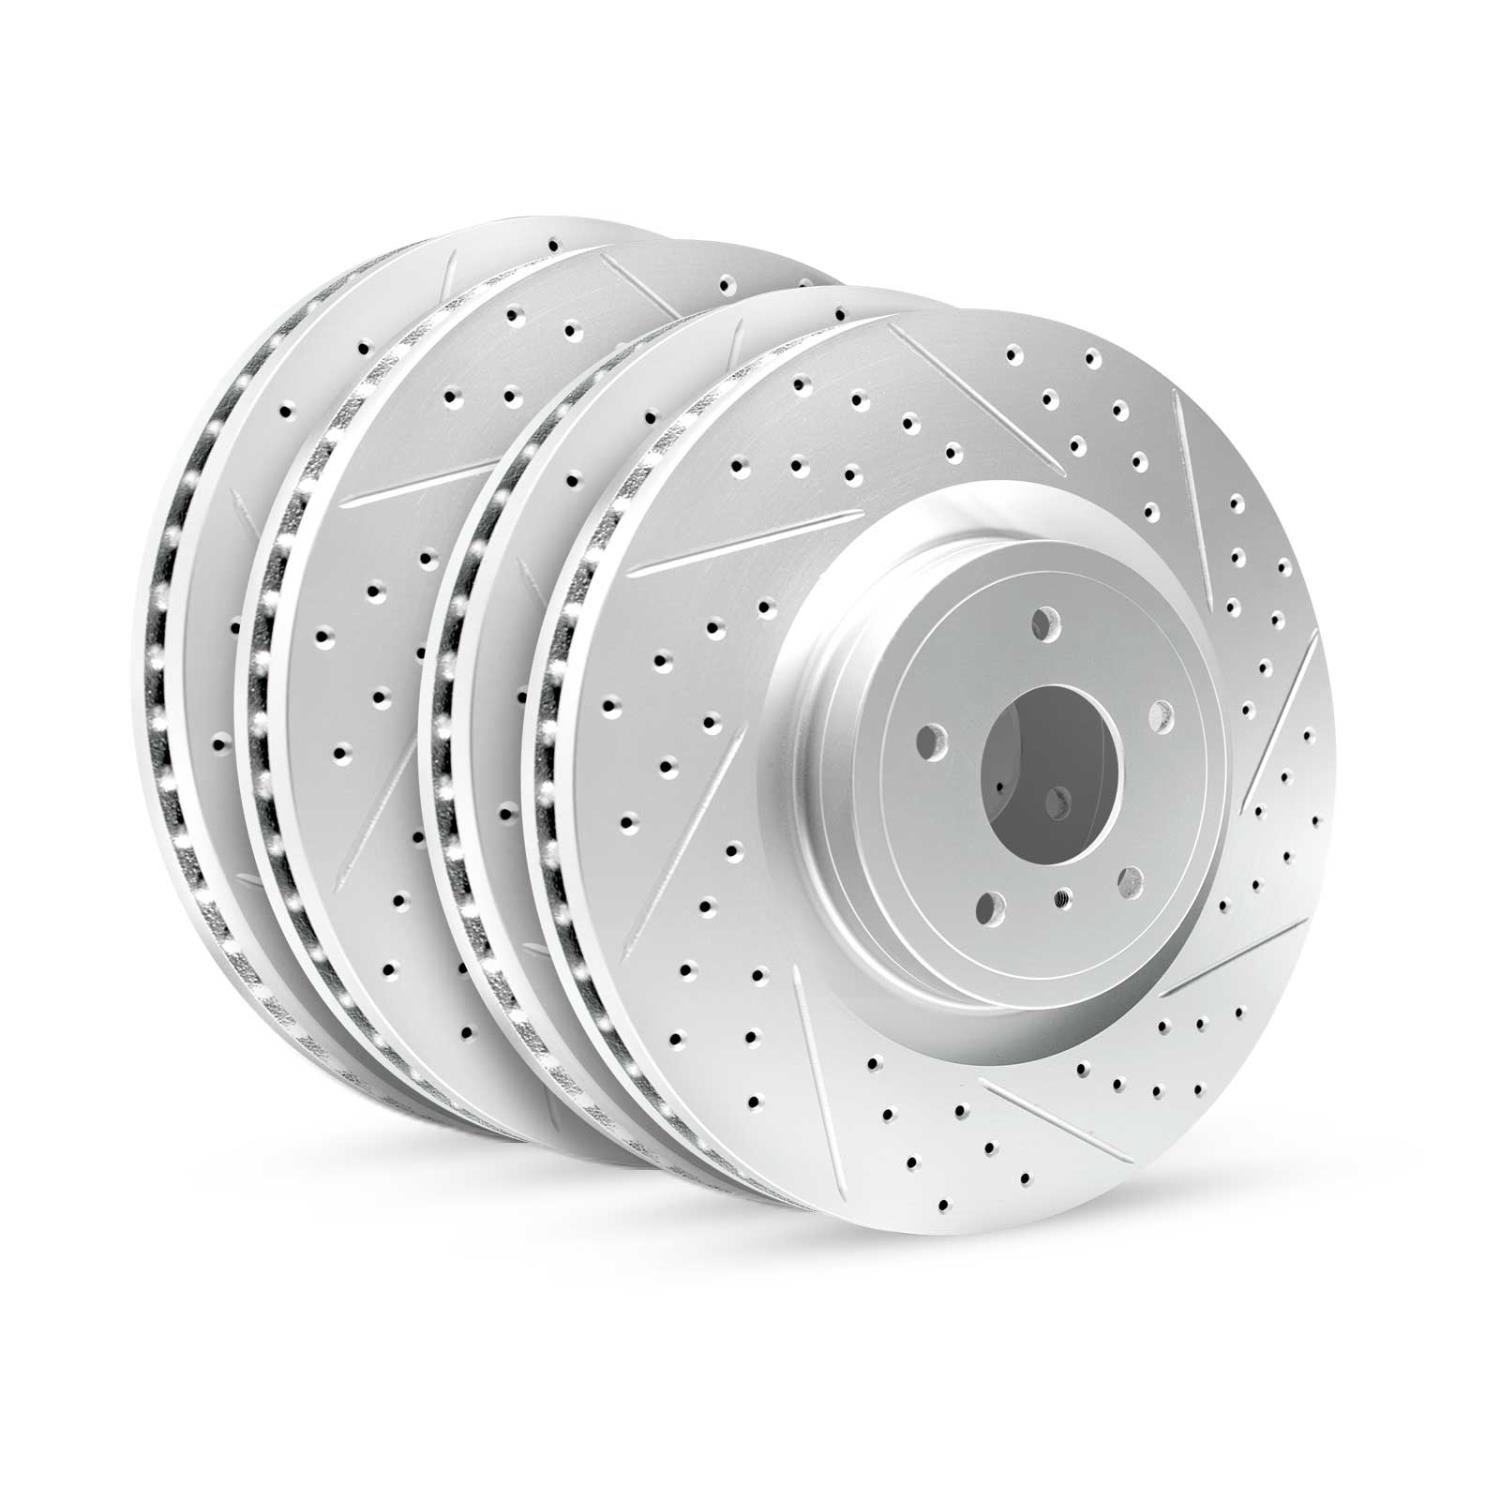 GEO-Carbon Drilled/Slotted Rotors, 1998-1999 BMW, Position: Front/Rear